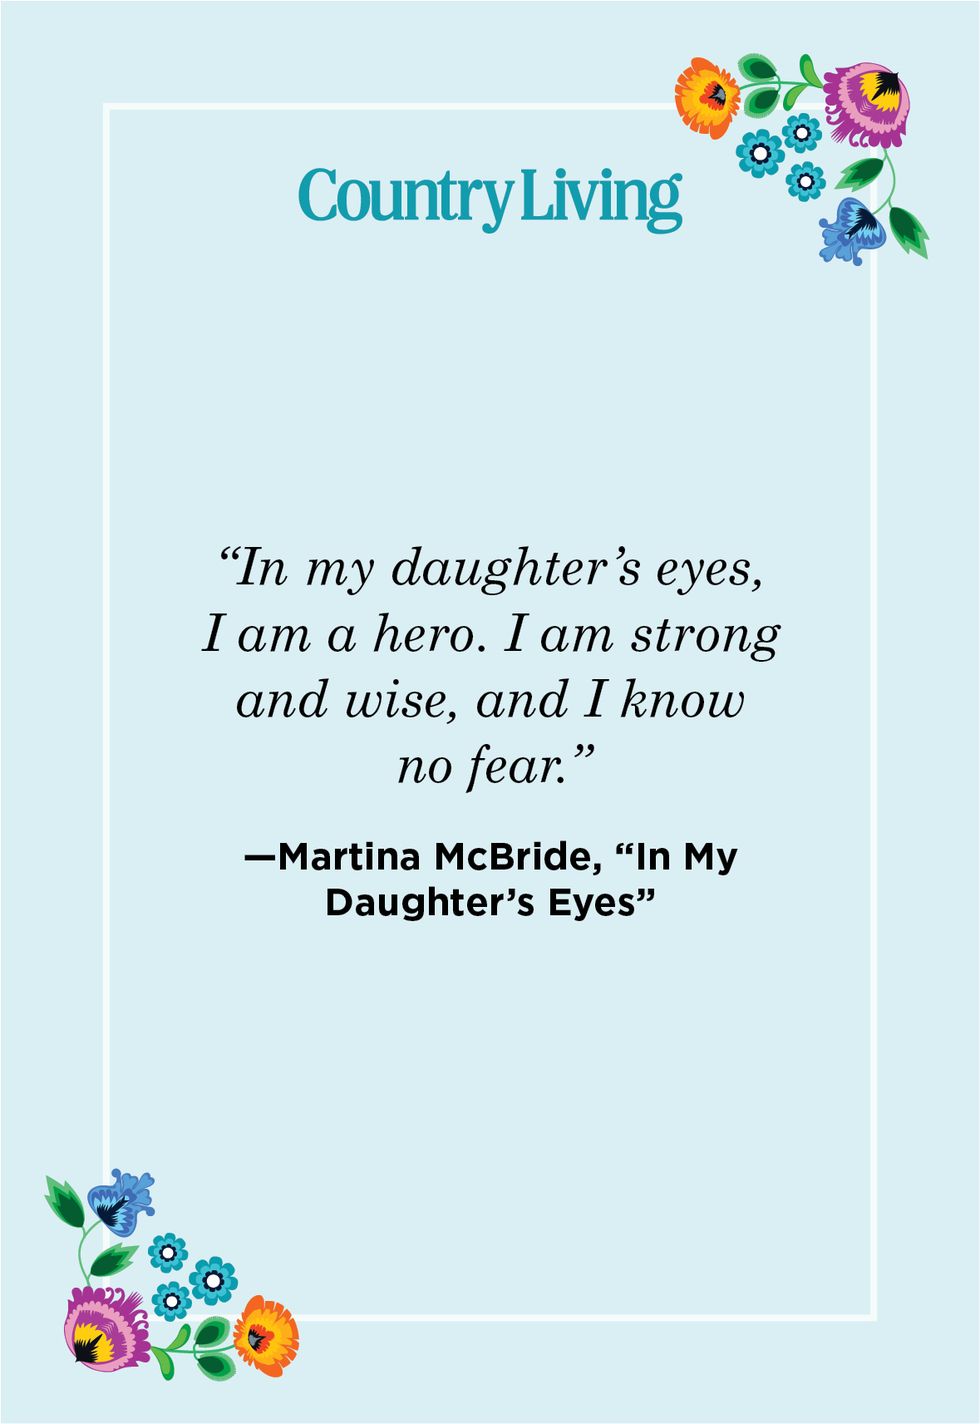 https://hips.hearstapps.com/hmg-prod/images/mother-daughter-quotes-martina-mcbride-64502f29422b8.jpg?crop=1xw:1xh;center,top&resize=980:*